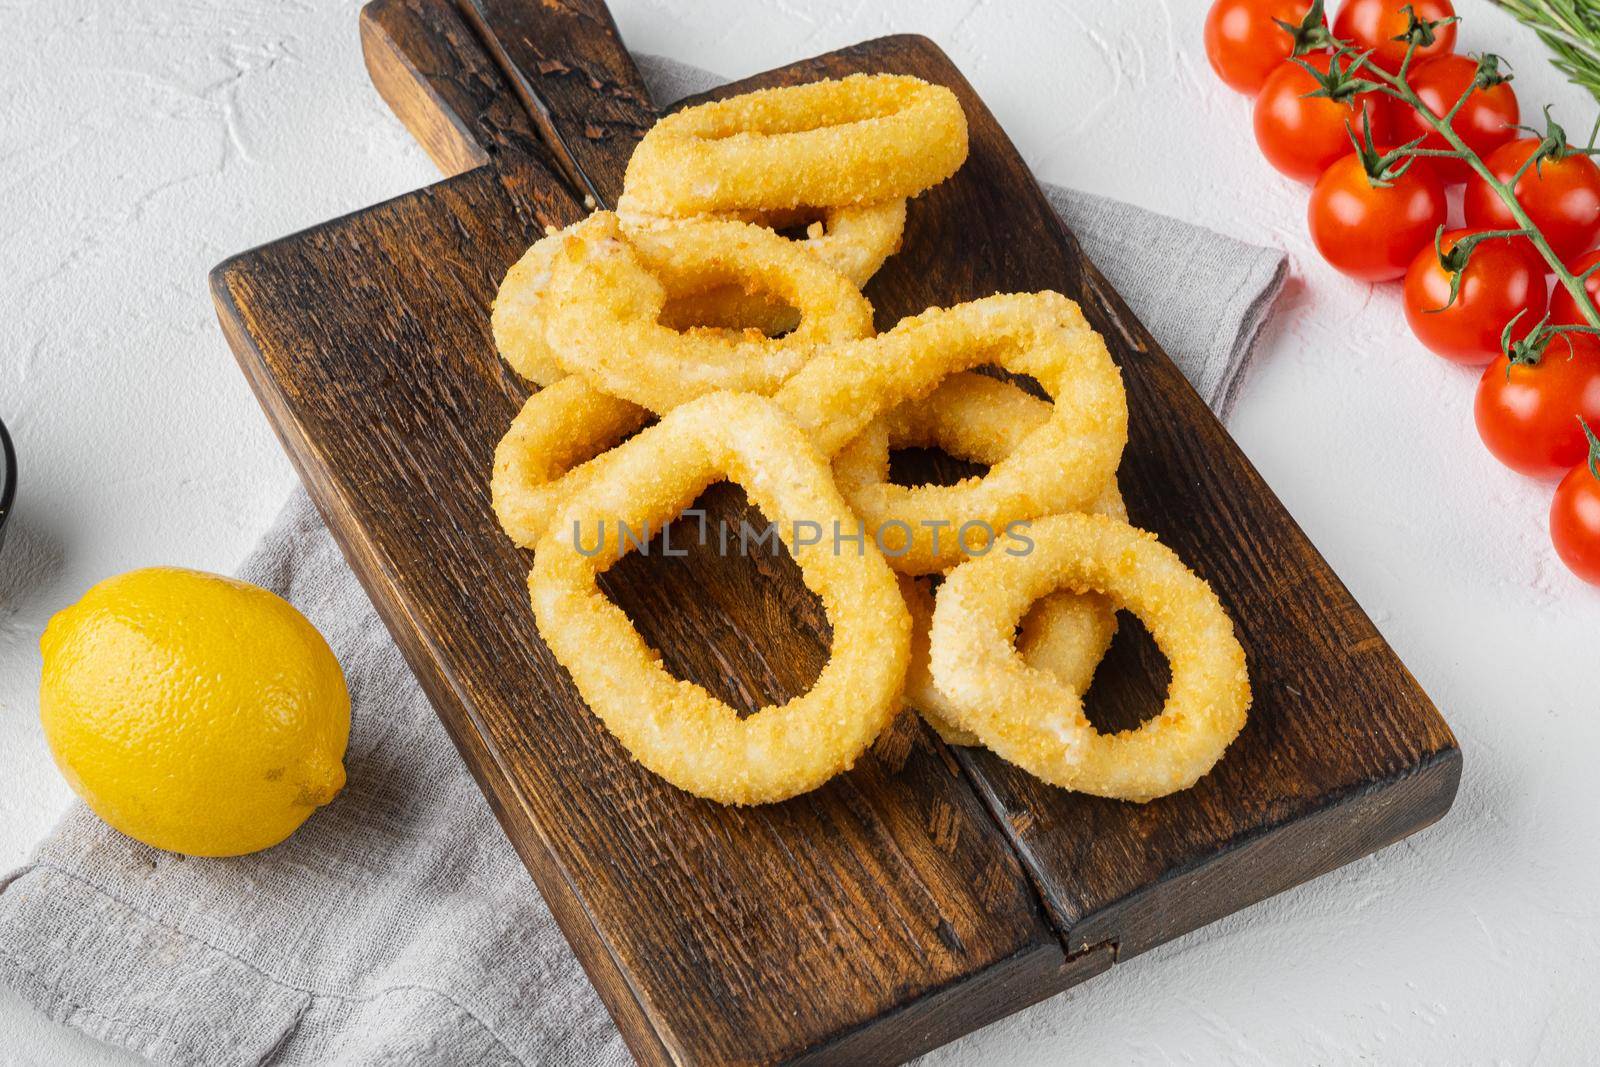 Fried squid rings breaded, on serving board, on white stone table background by Ilianesolenyi